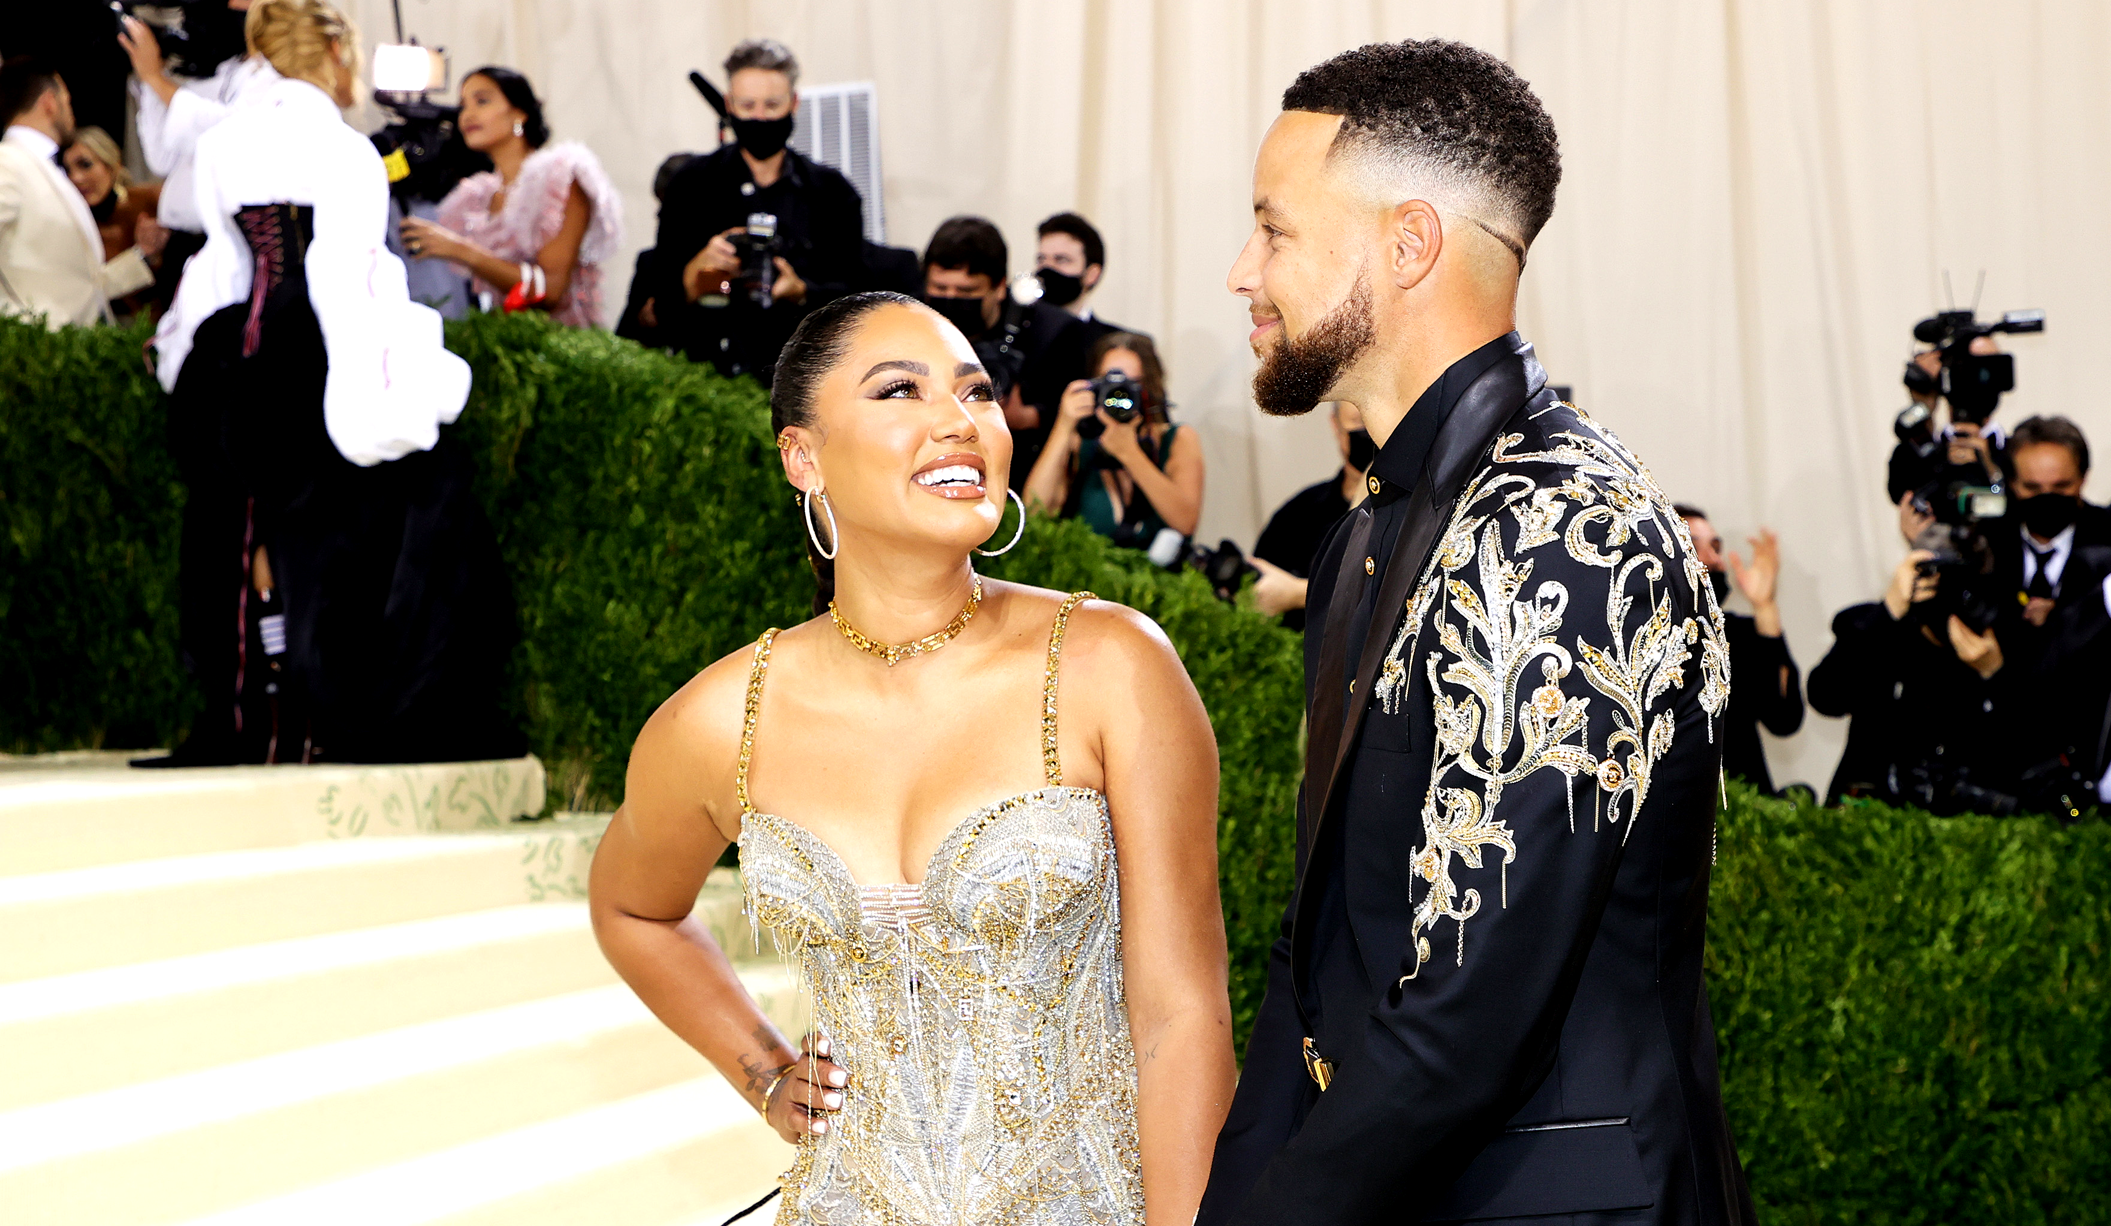 Aht Aht!' Ayesha Curry Shuts Down Rumors of Being In An Open Marriage With Steph  Curry